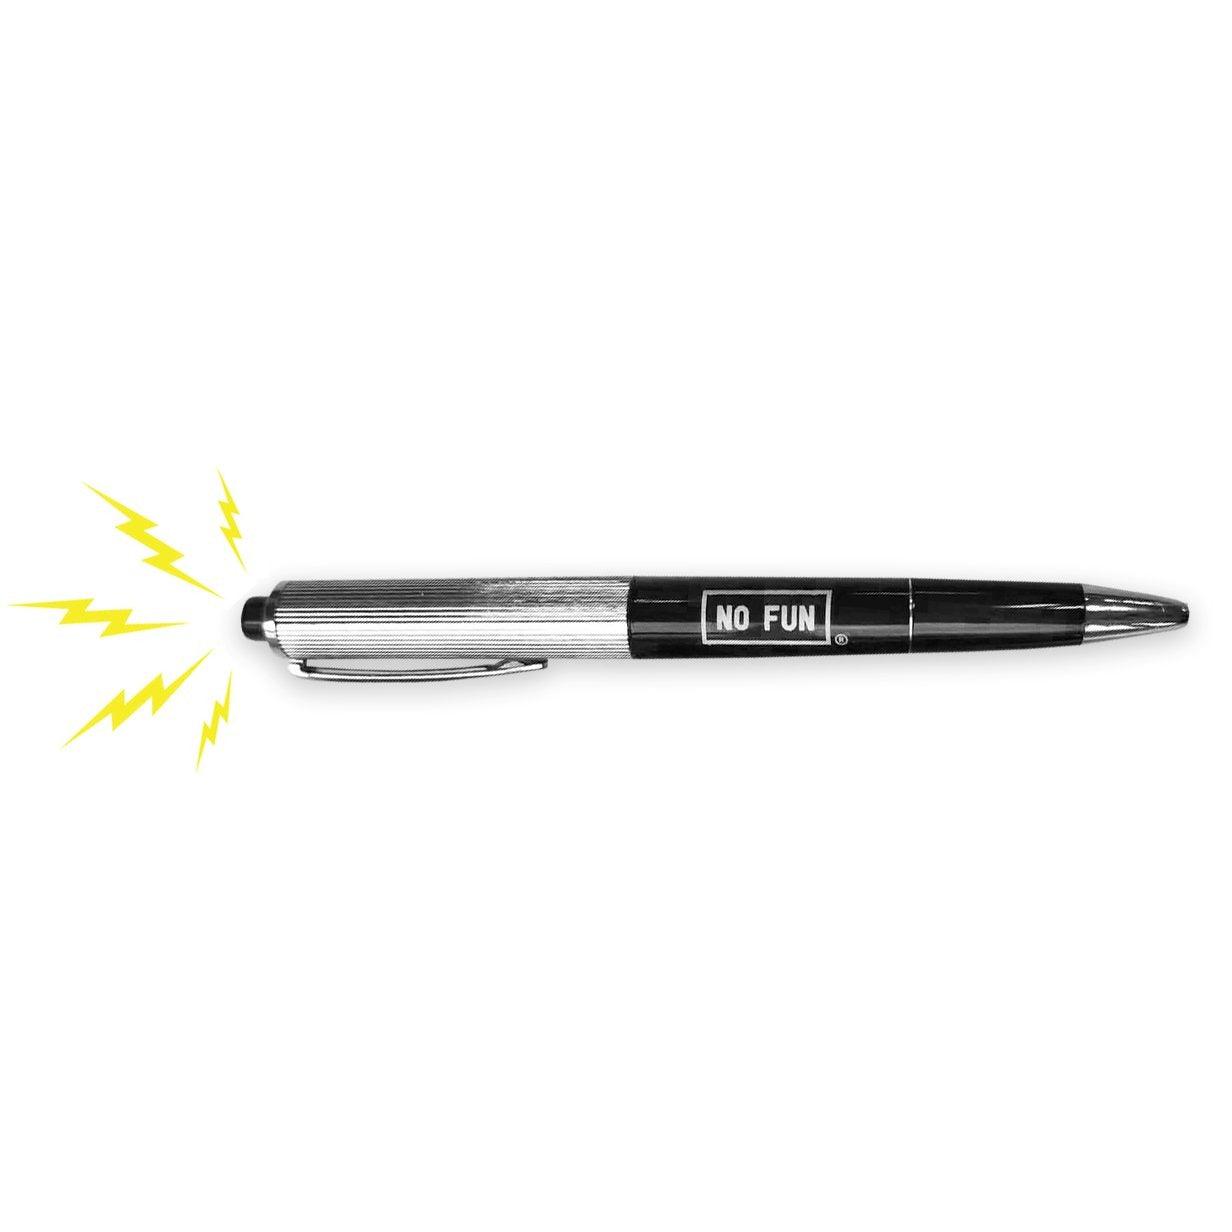 "High Energy" Shocking Pen from No Fun®. A prank, novelty pen that shocks the user when clicked.  The photo has illustrated lightning bolts near the top, to show where the effect happens.